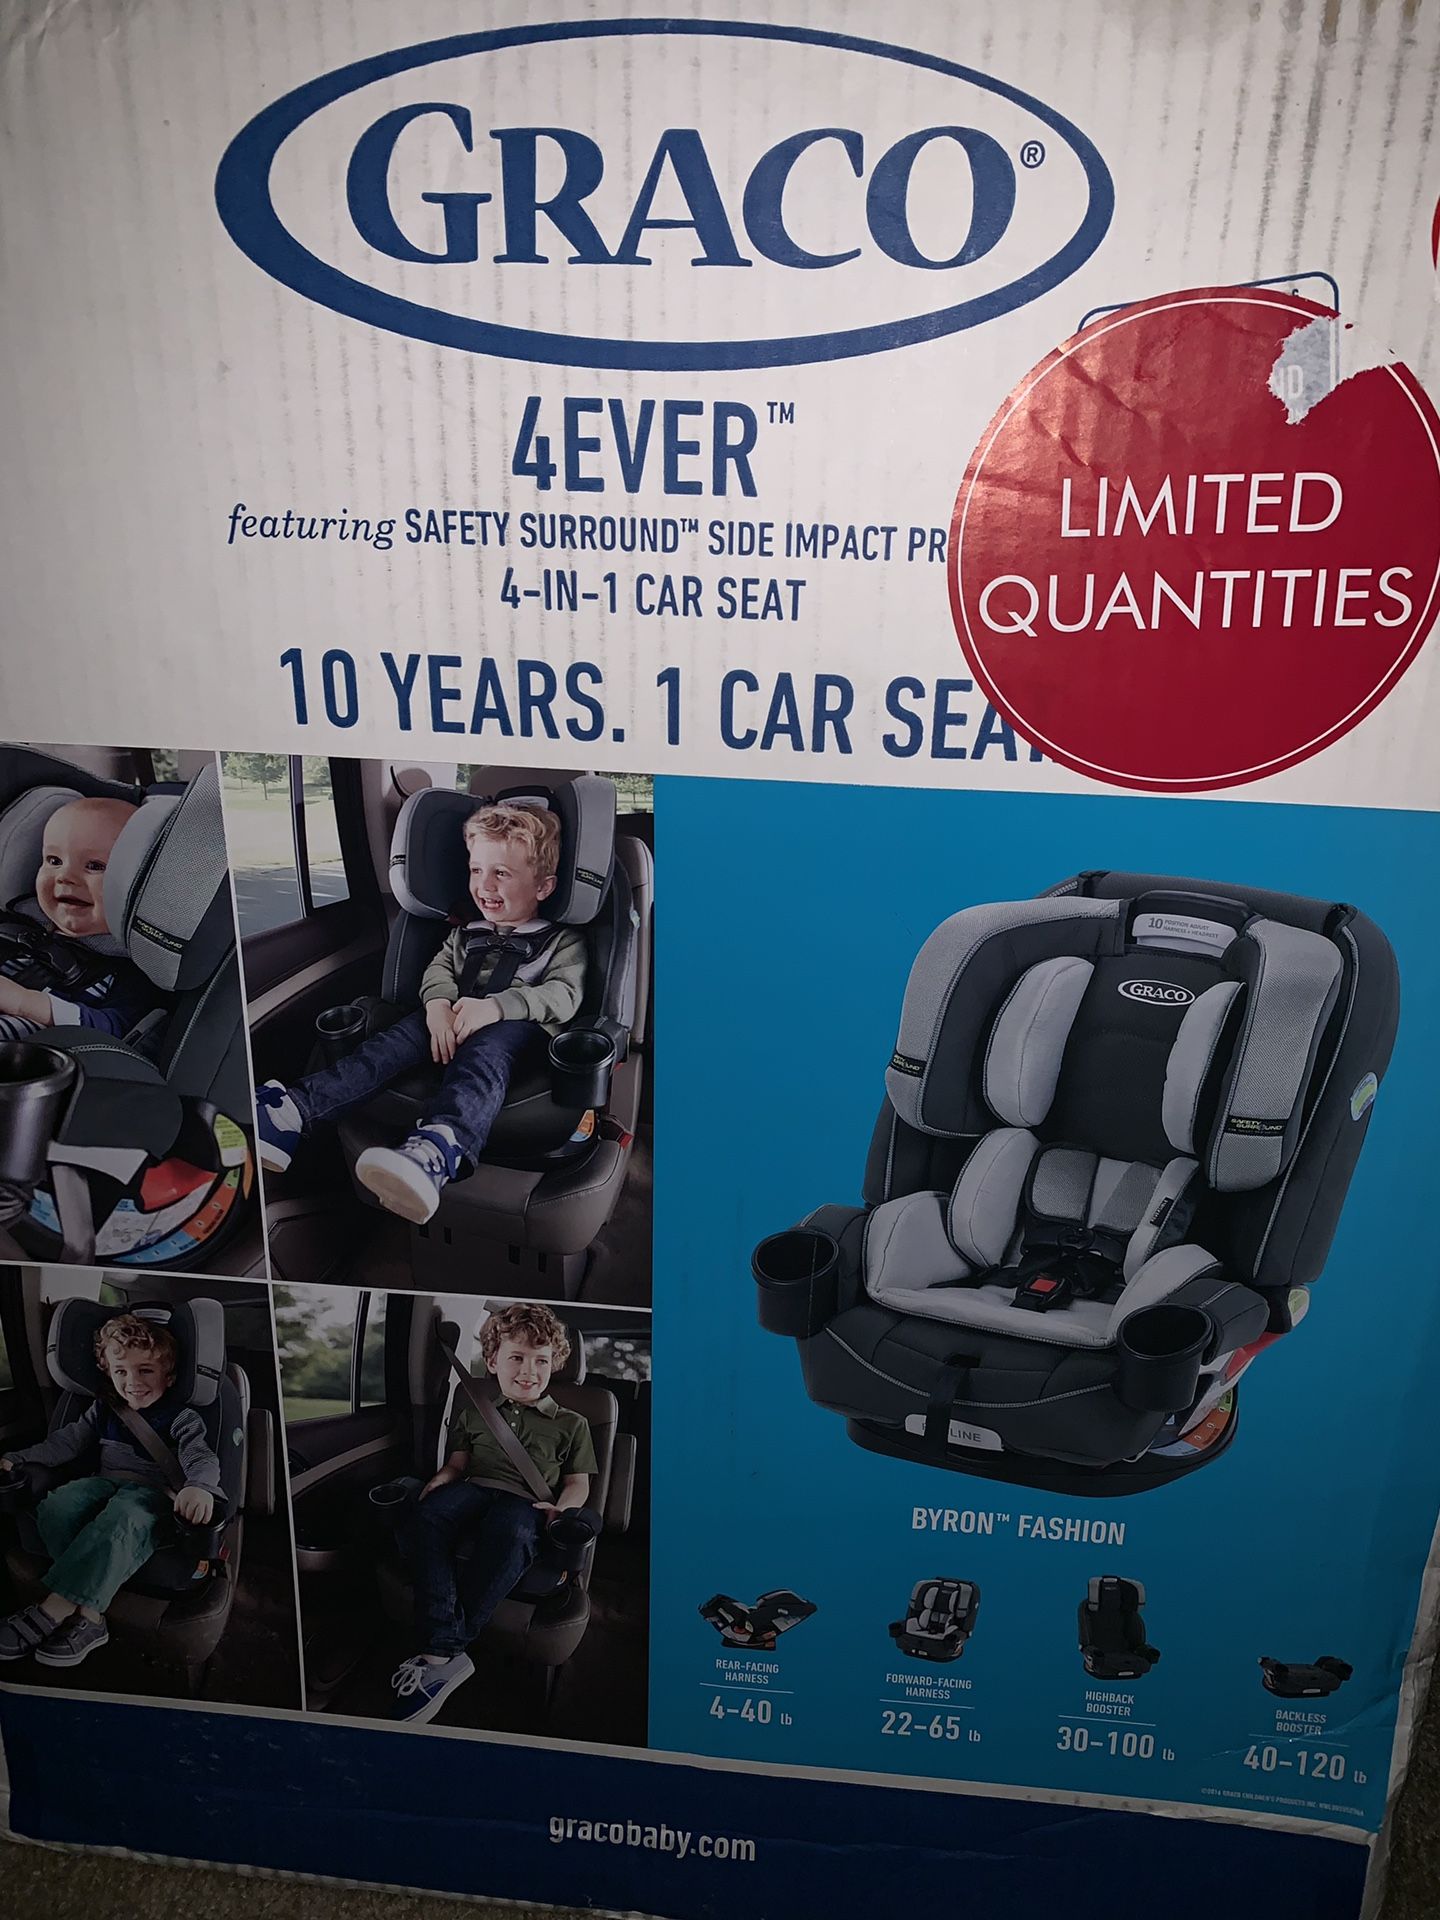 New Graco 4ever car seat